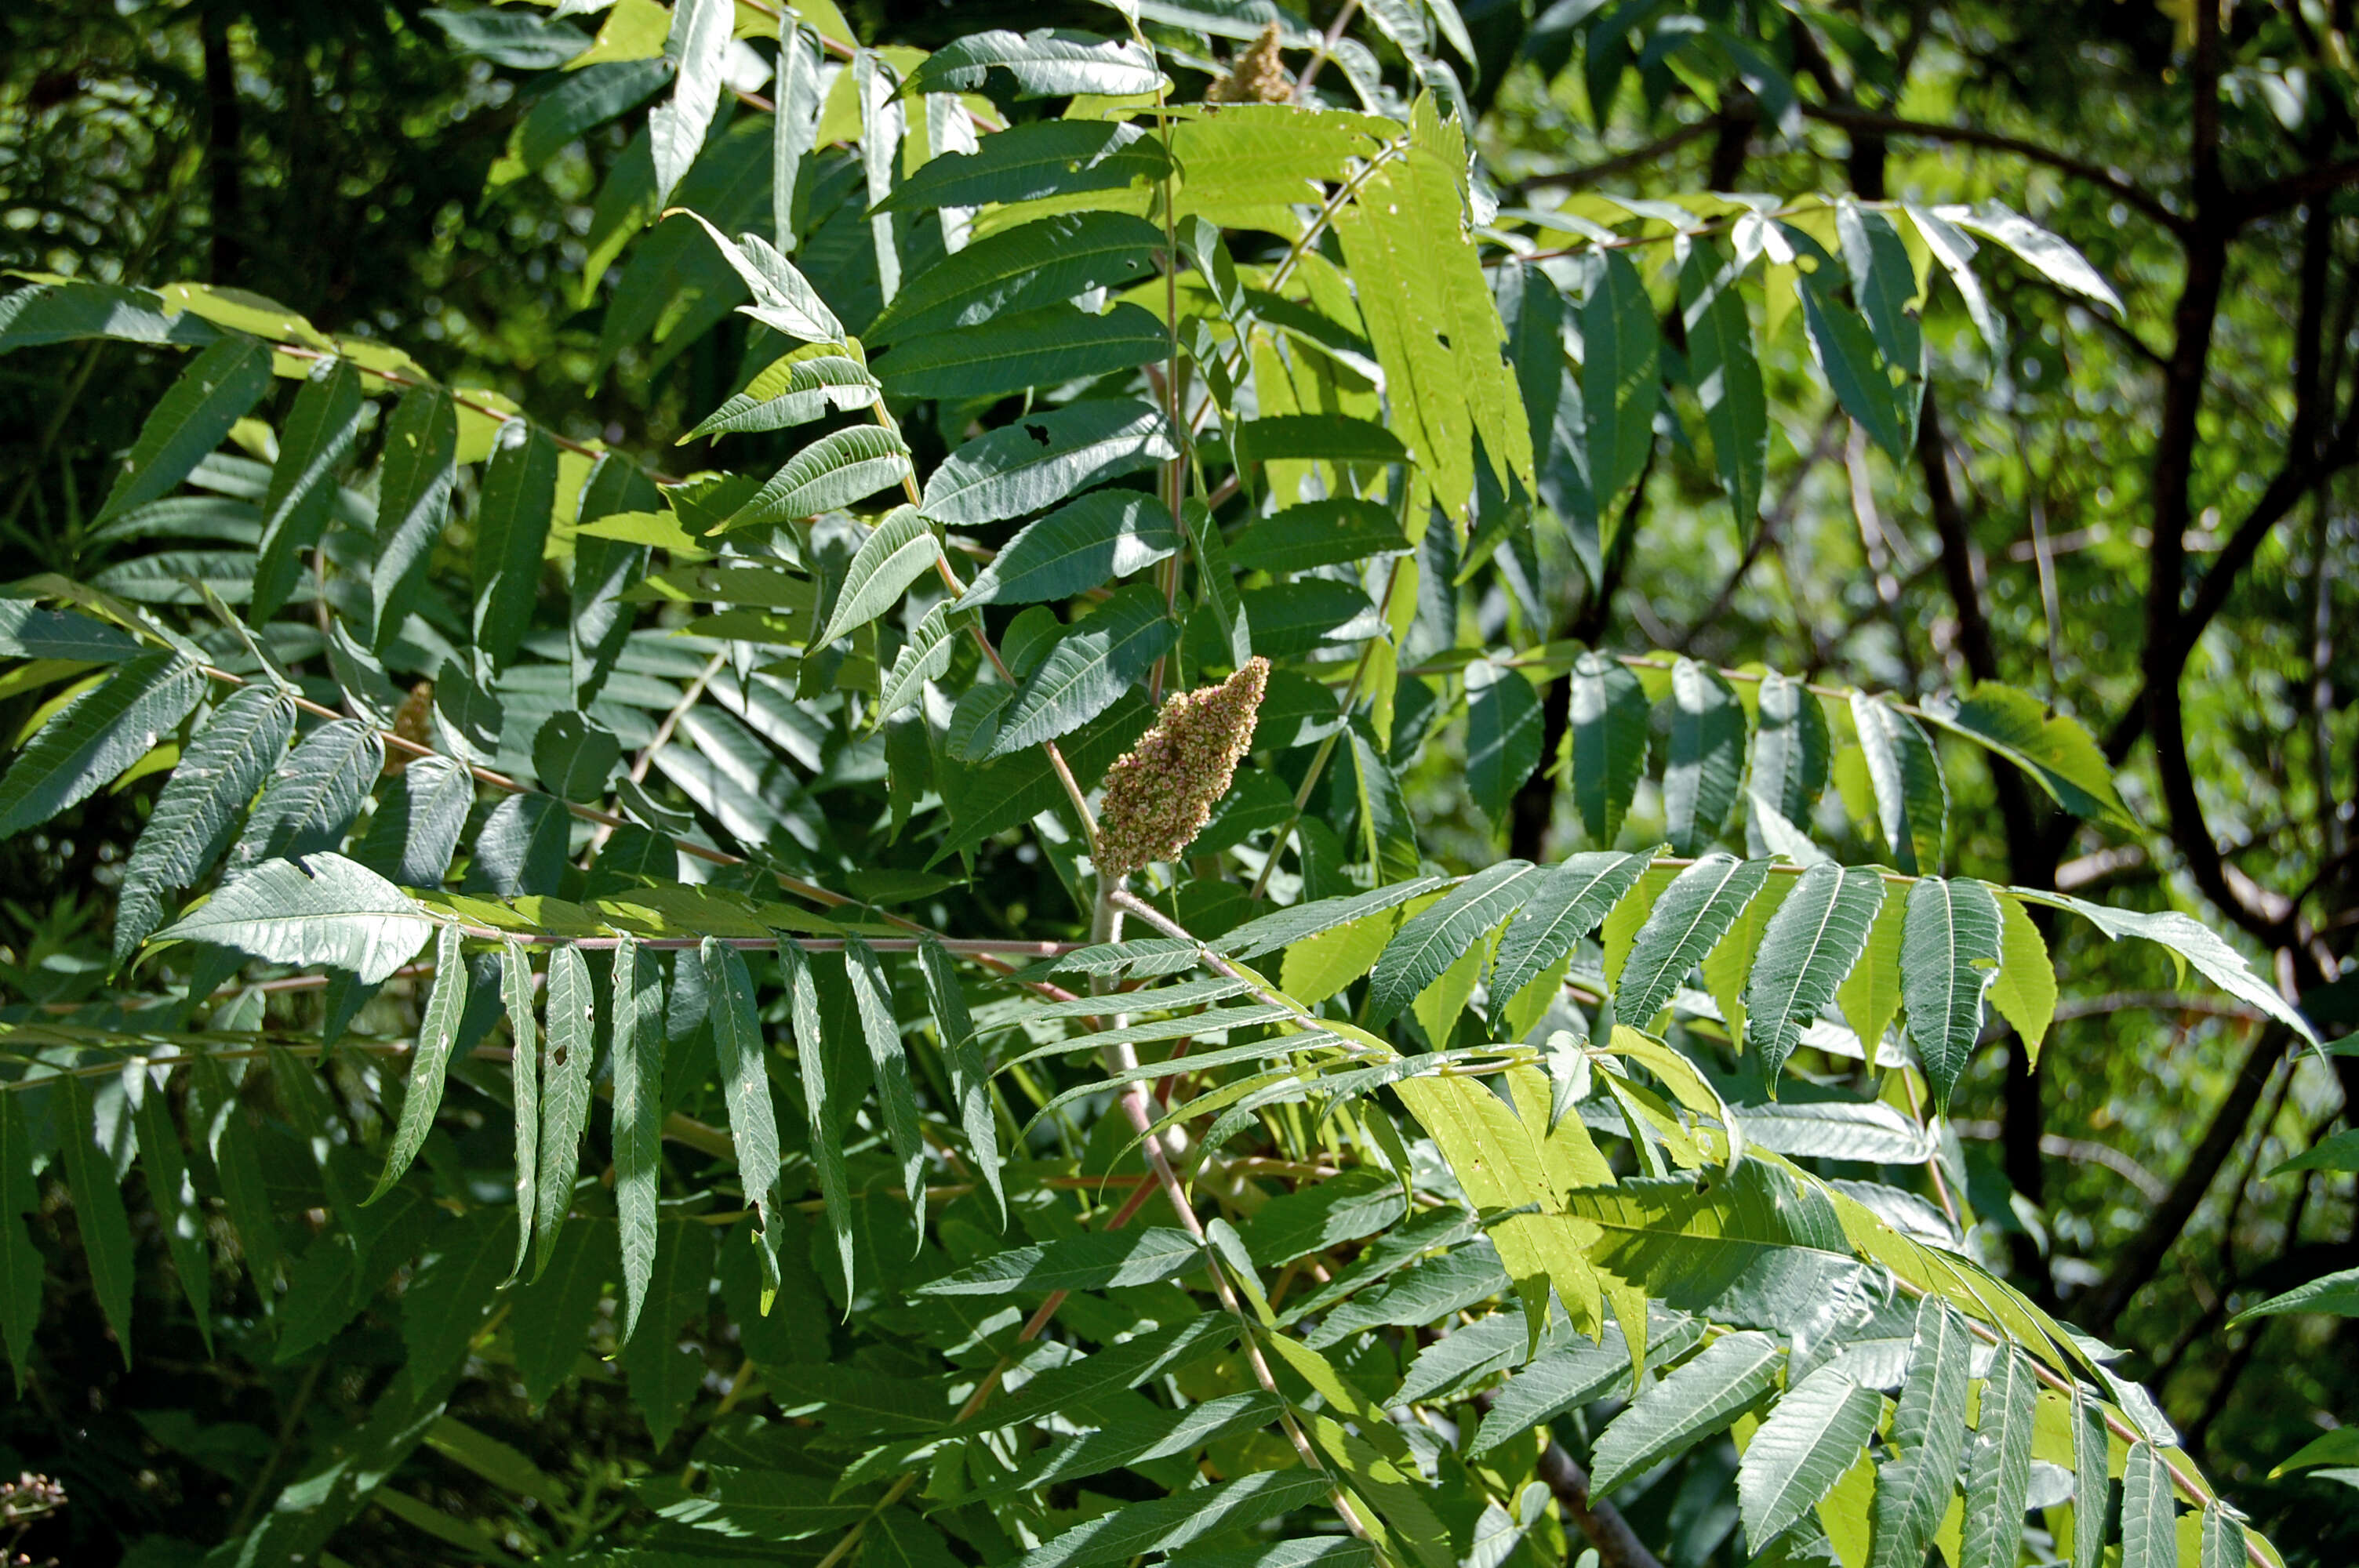 Image of staghorn sumac